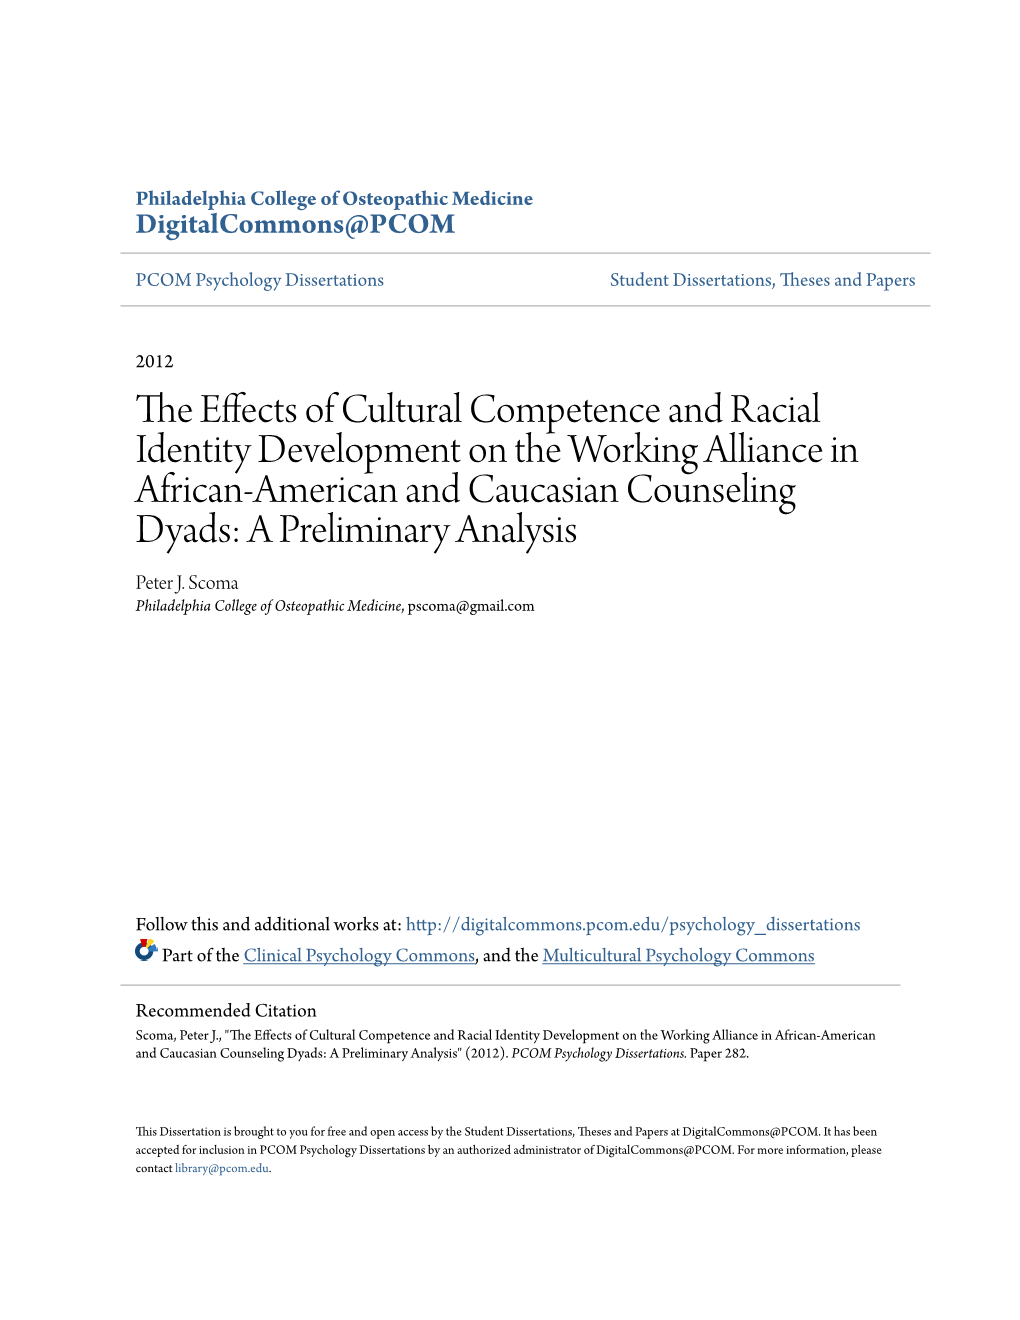 The Effects of Cultural Competence and Racial Identity Development on the Working Alliance in African-American and Caucasian